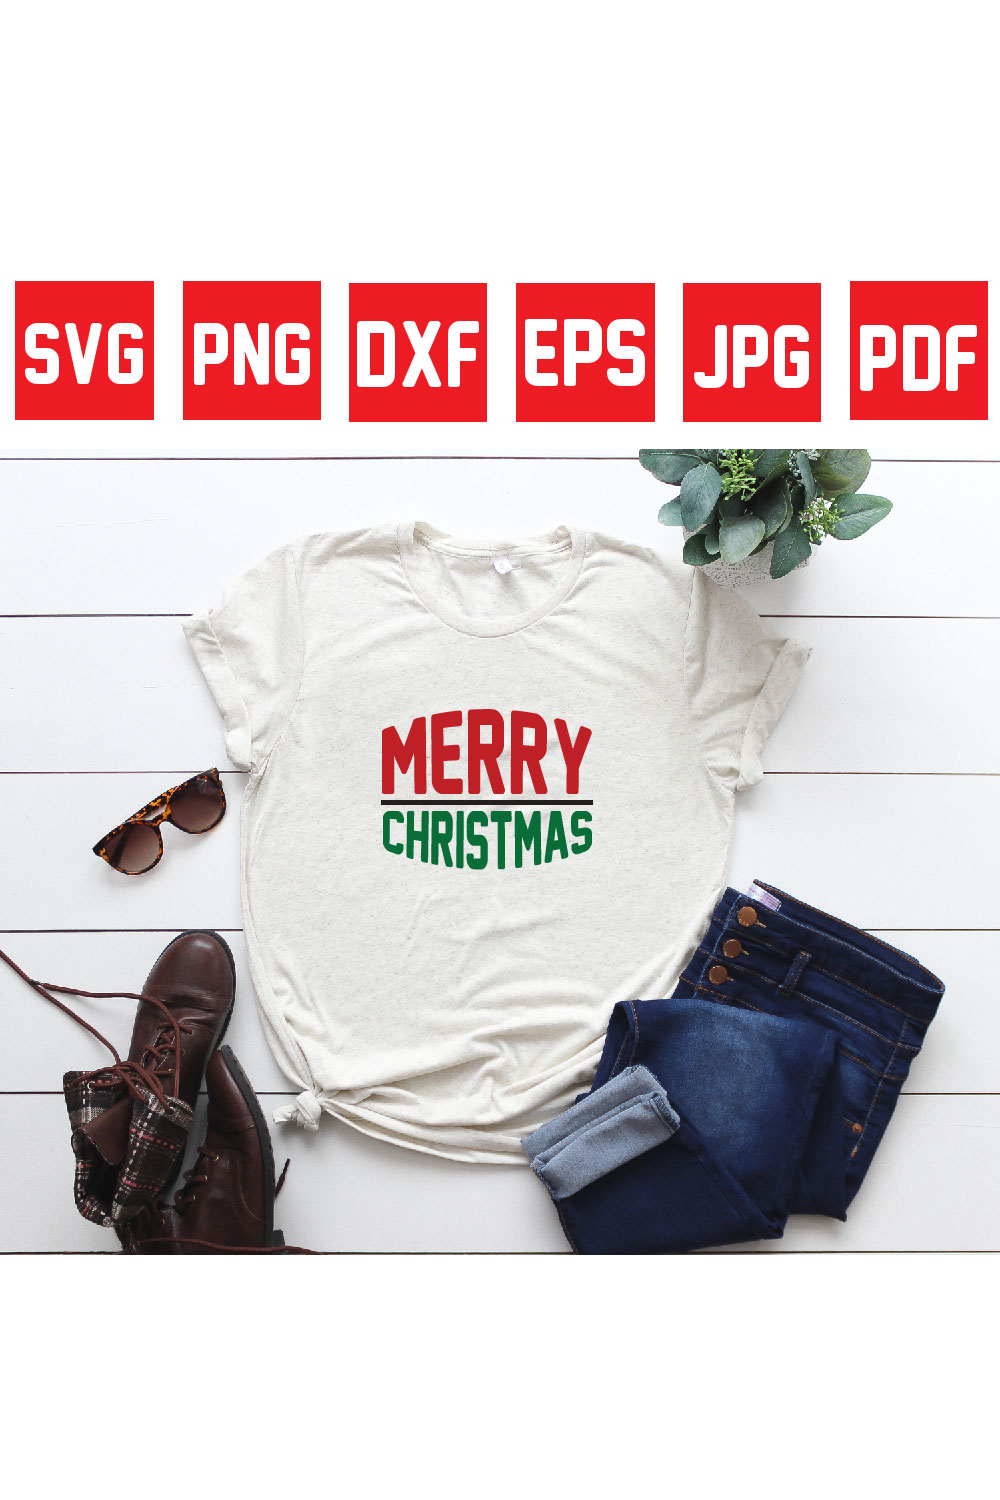 merry christmas pinterest preview image.